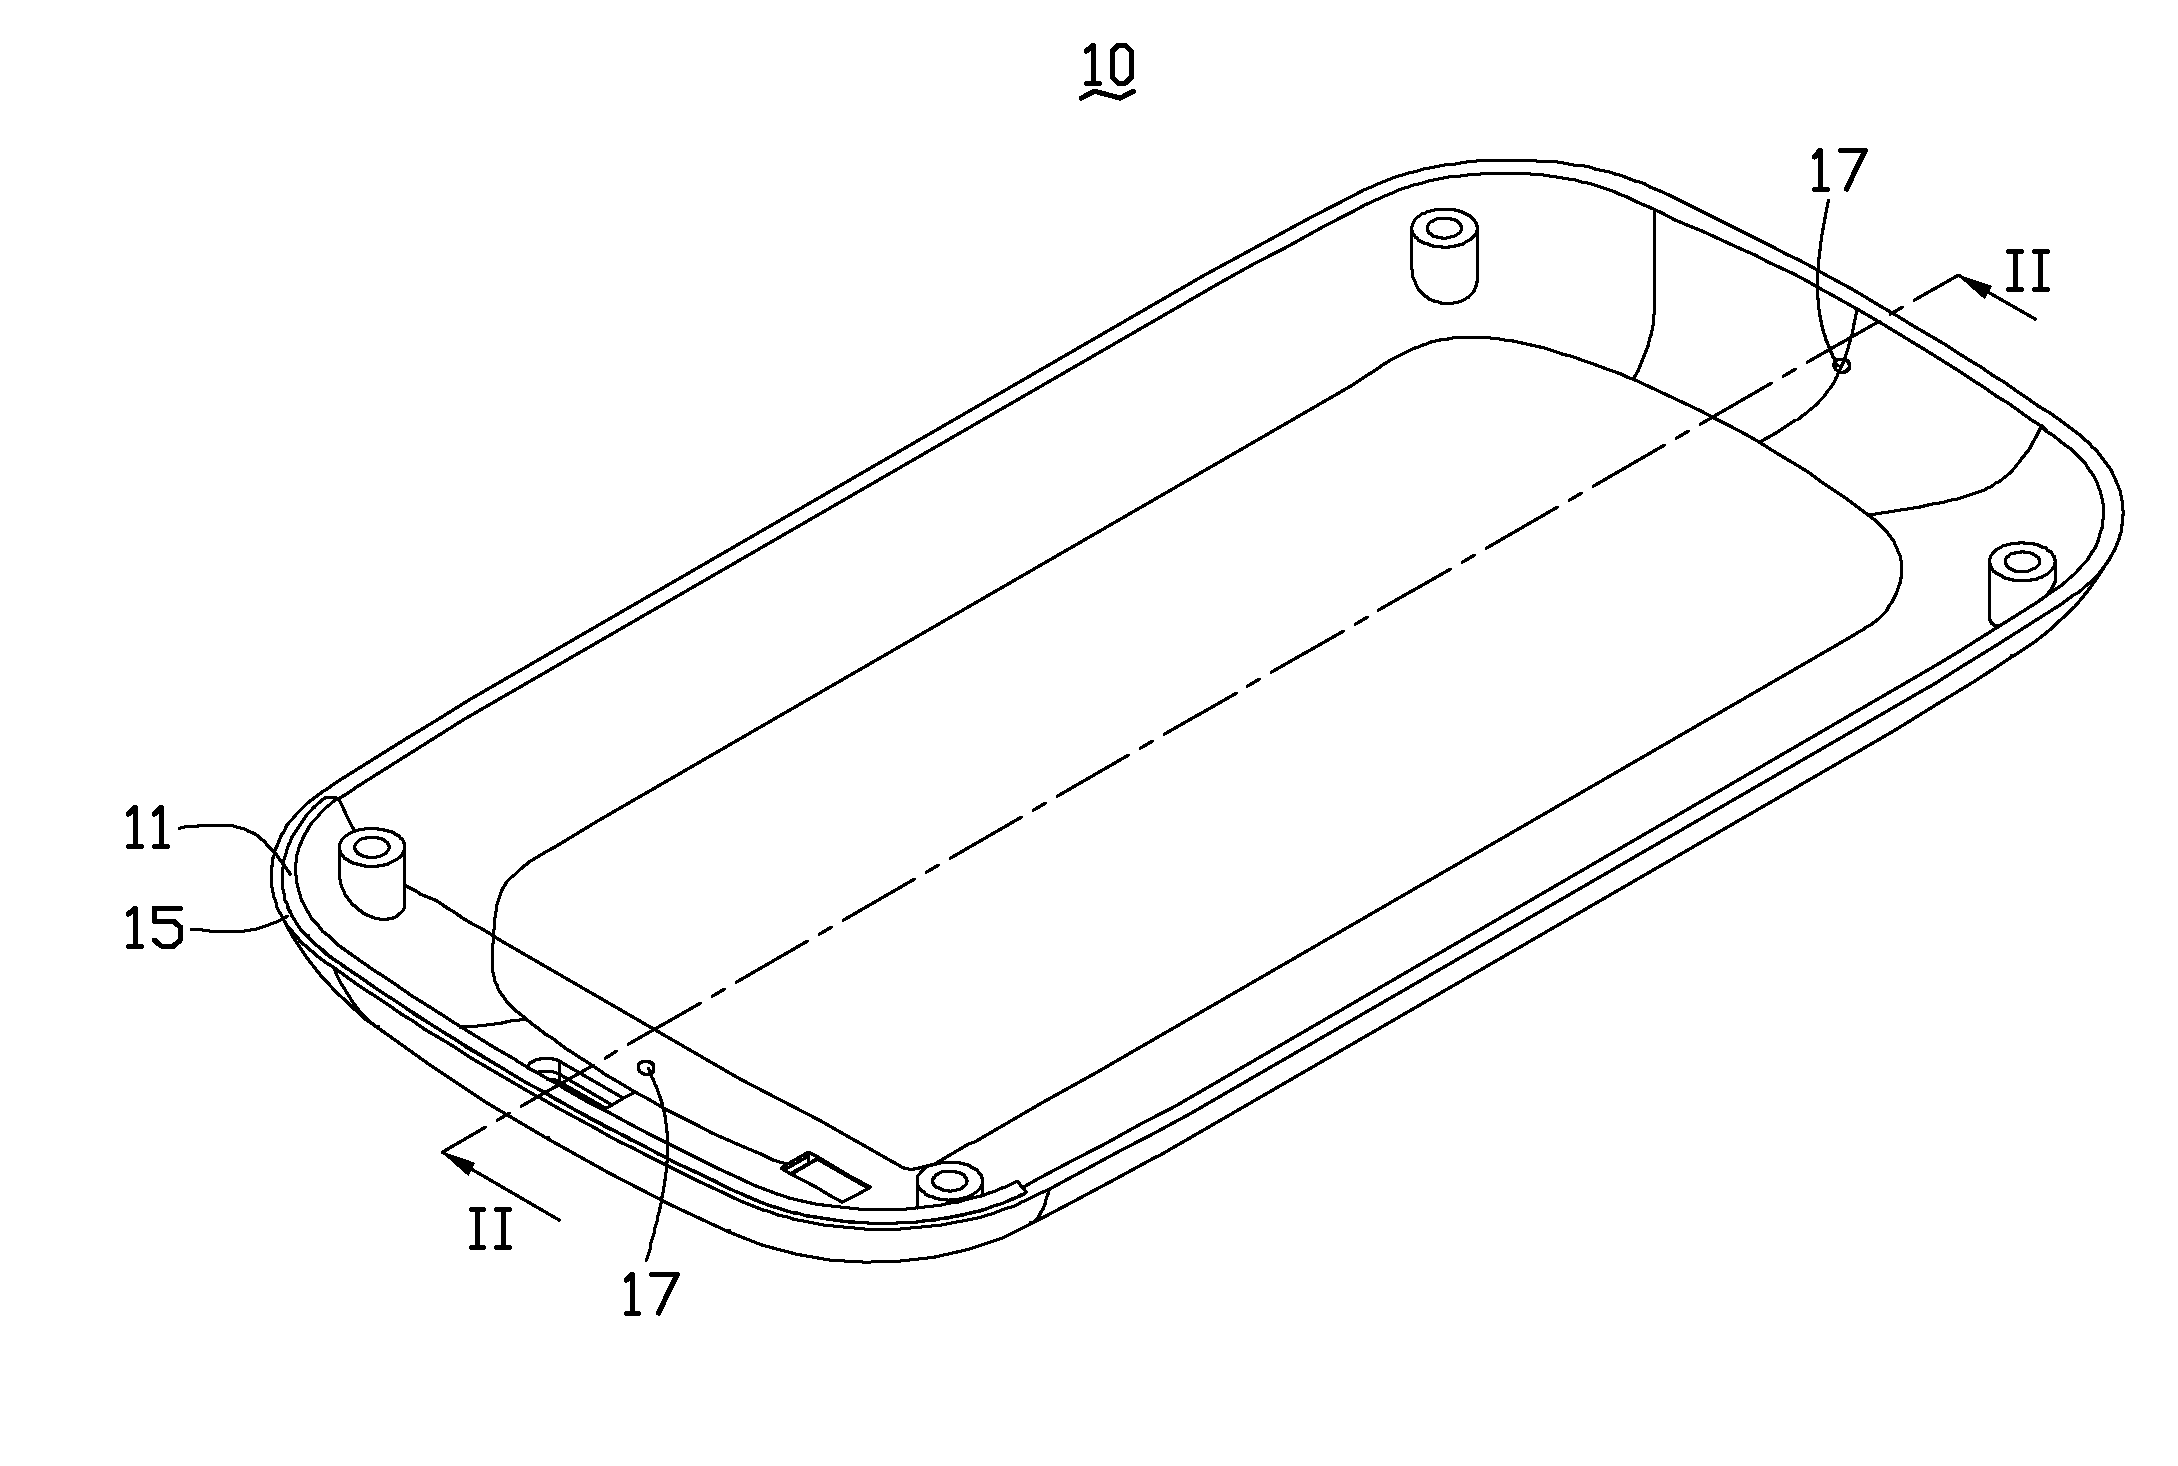 Housing of portable electronic device and method for making the same